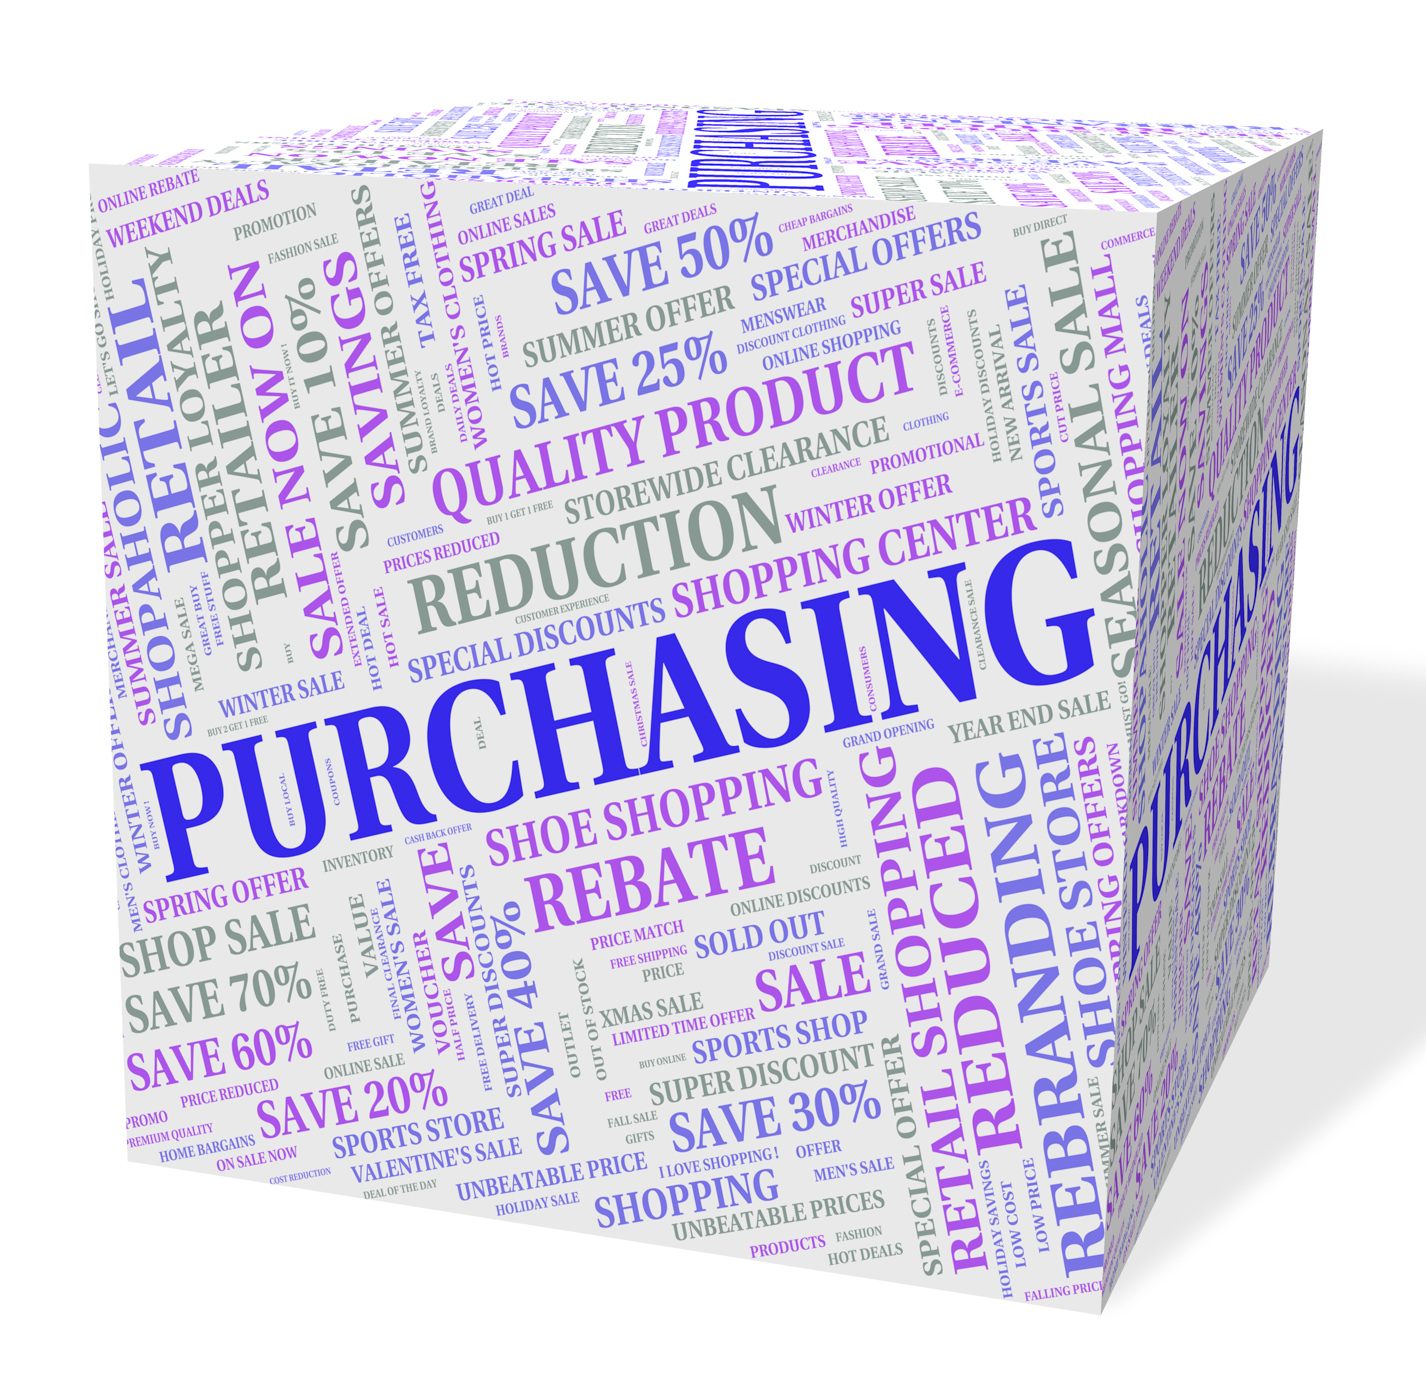 Purchasing cube means client purchase and text photo